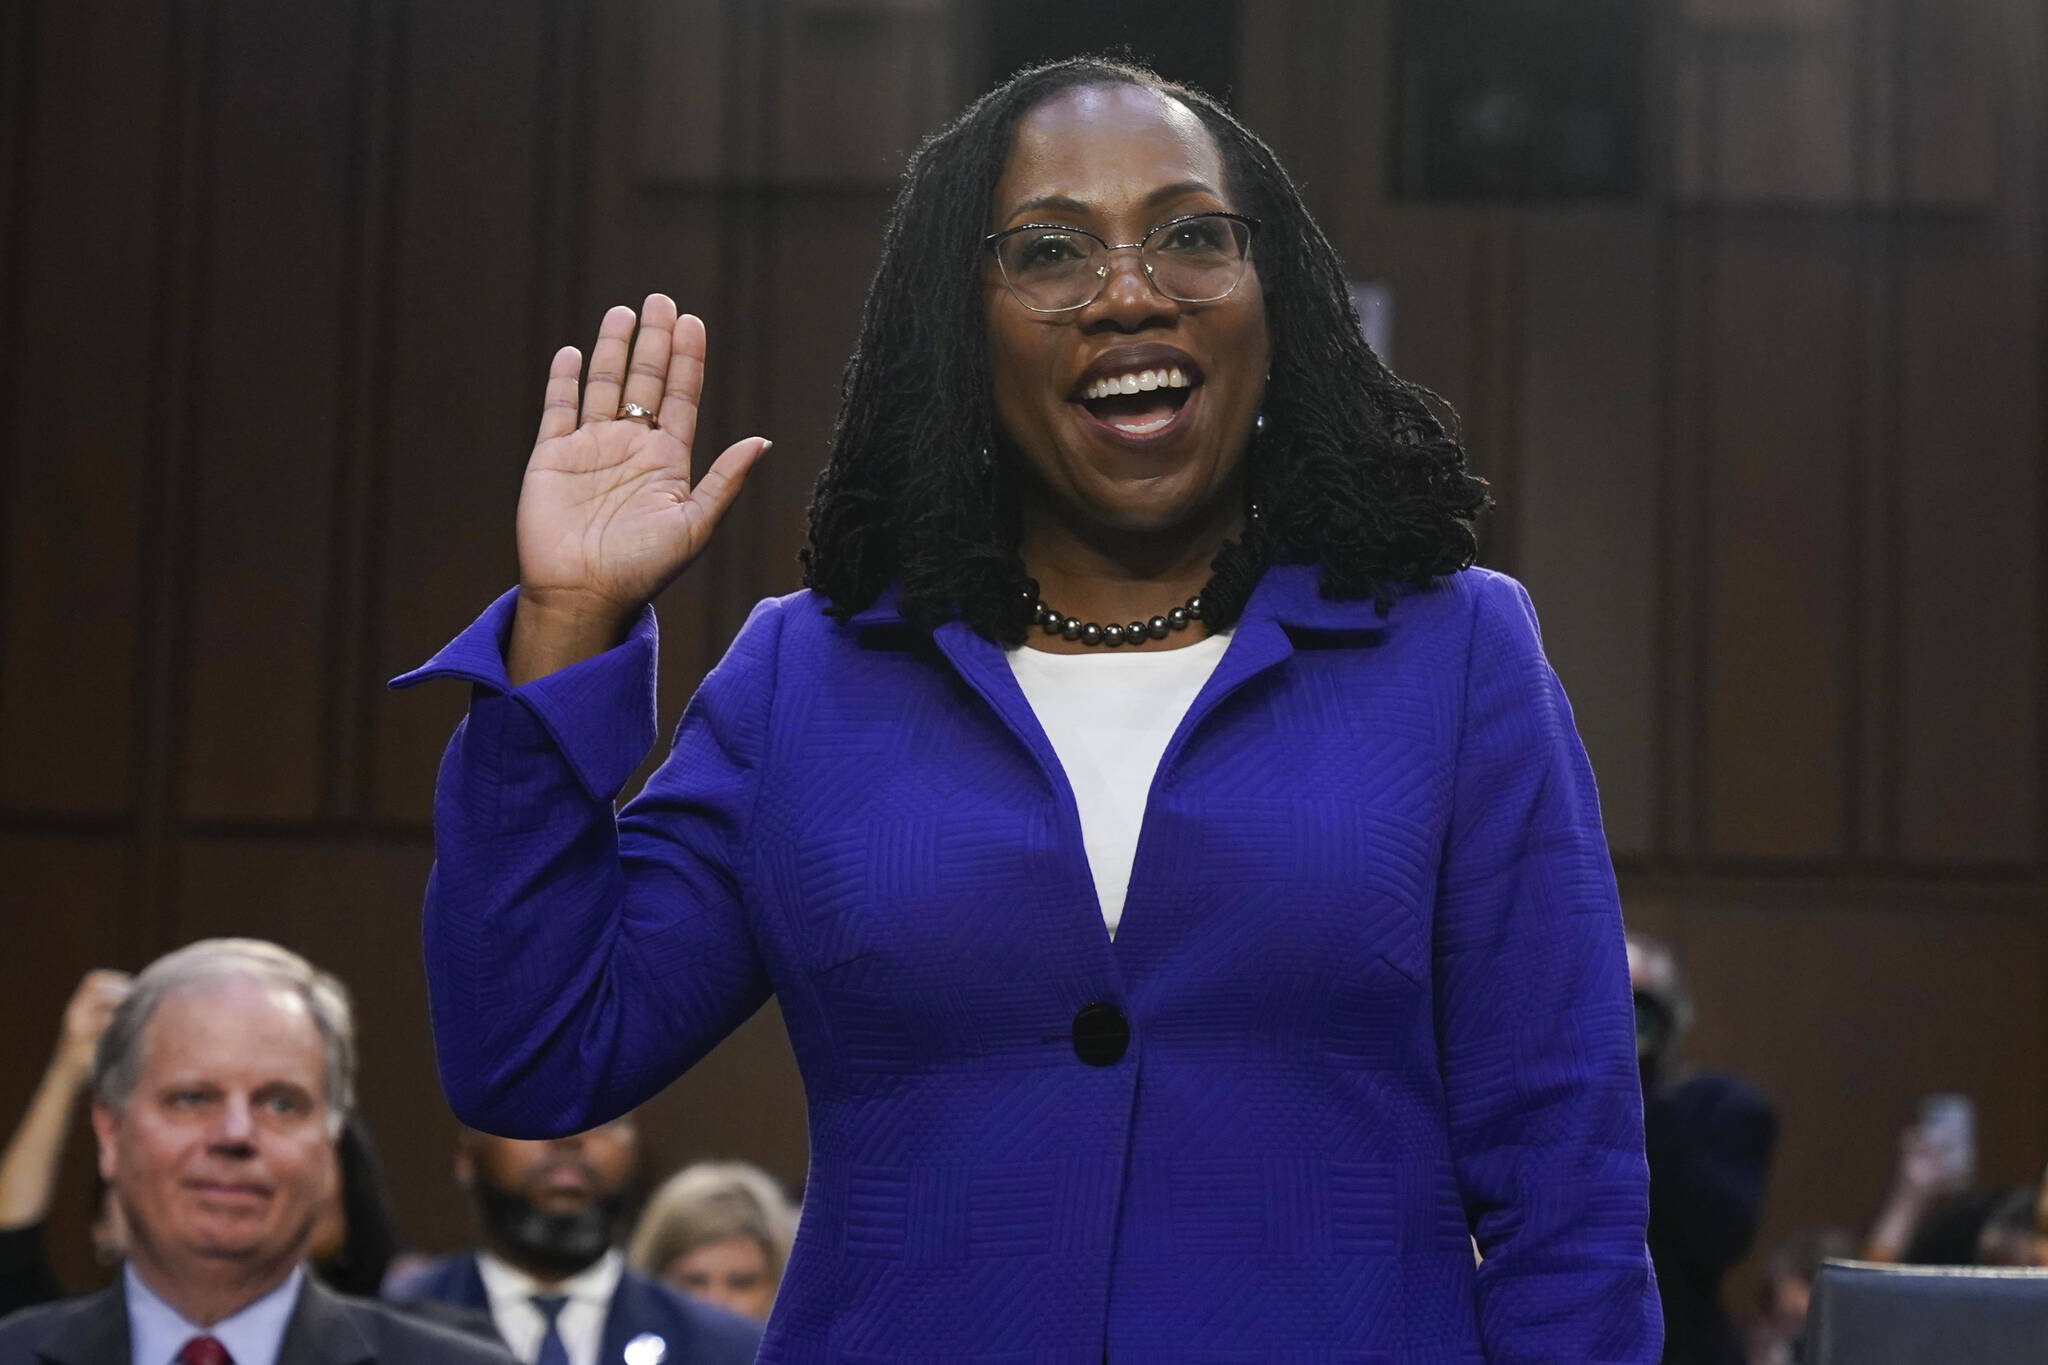 Supreme Court nominee Judge Ketanji Brown Jackson is sworn in for her confirmation hearing before the Senate Judiciary Committee March 21, 2022, on Capitol Hill in Washington. (AP Photo / Jacquelyn Martin)